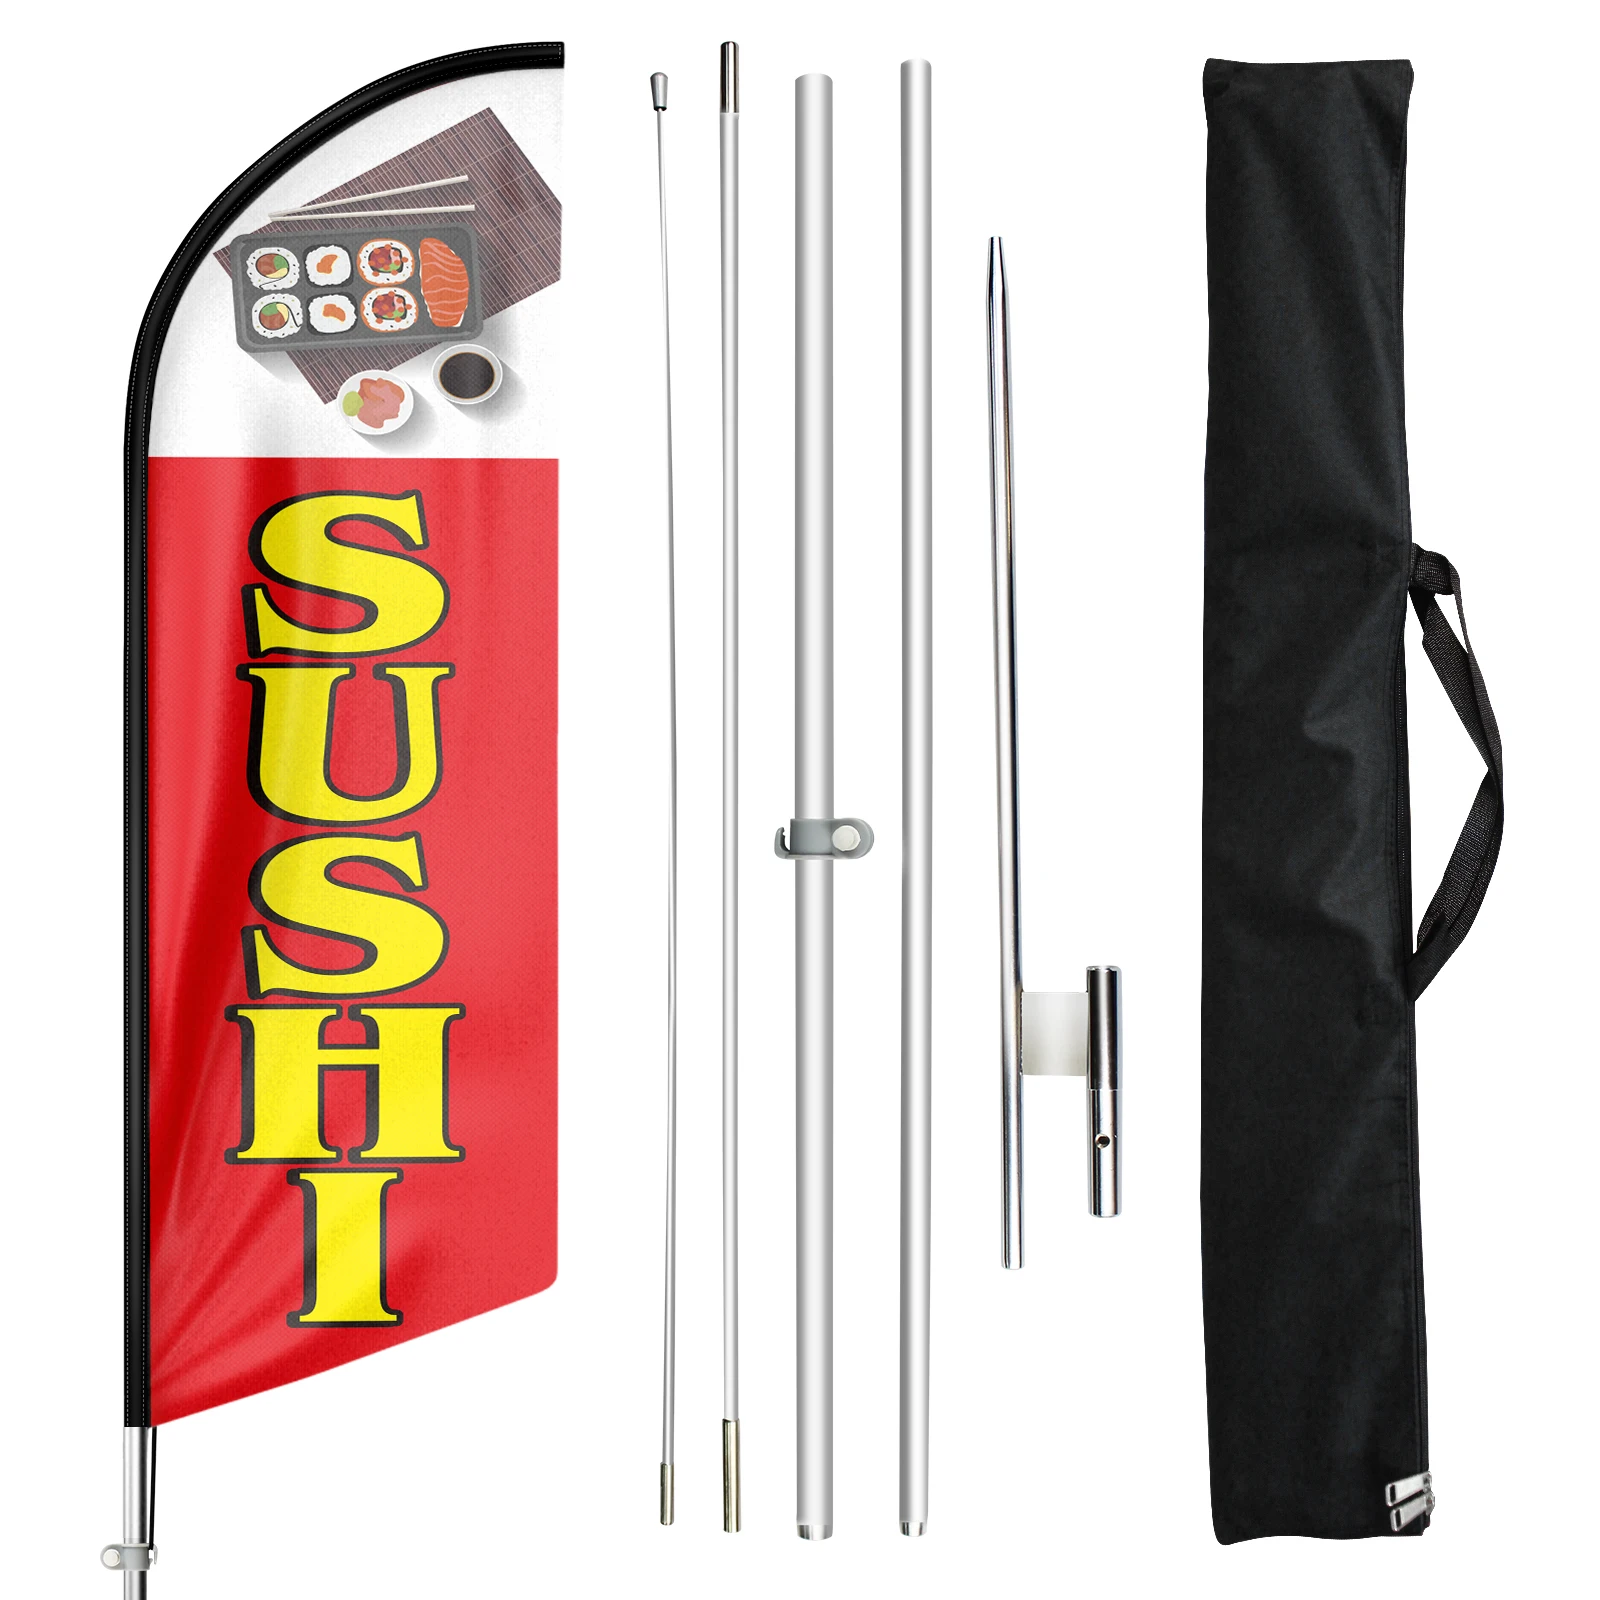 Custom red TOYOTA 15' Feather Banner Swooper Flag Kit with pole+spike 